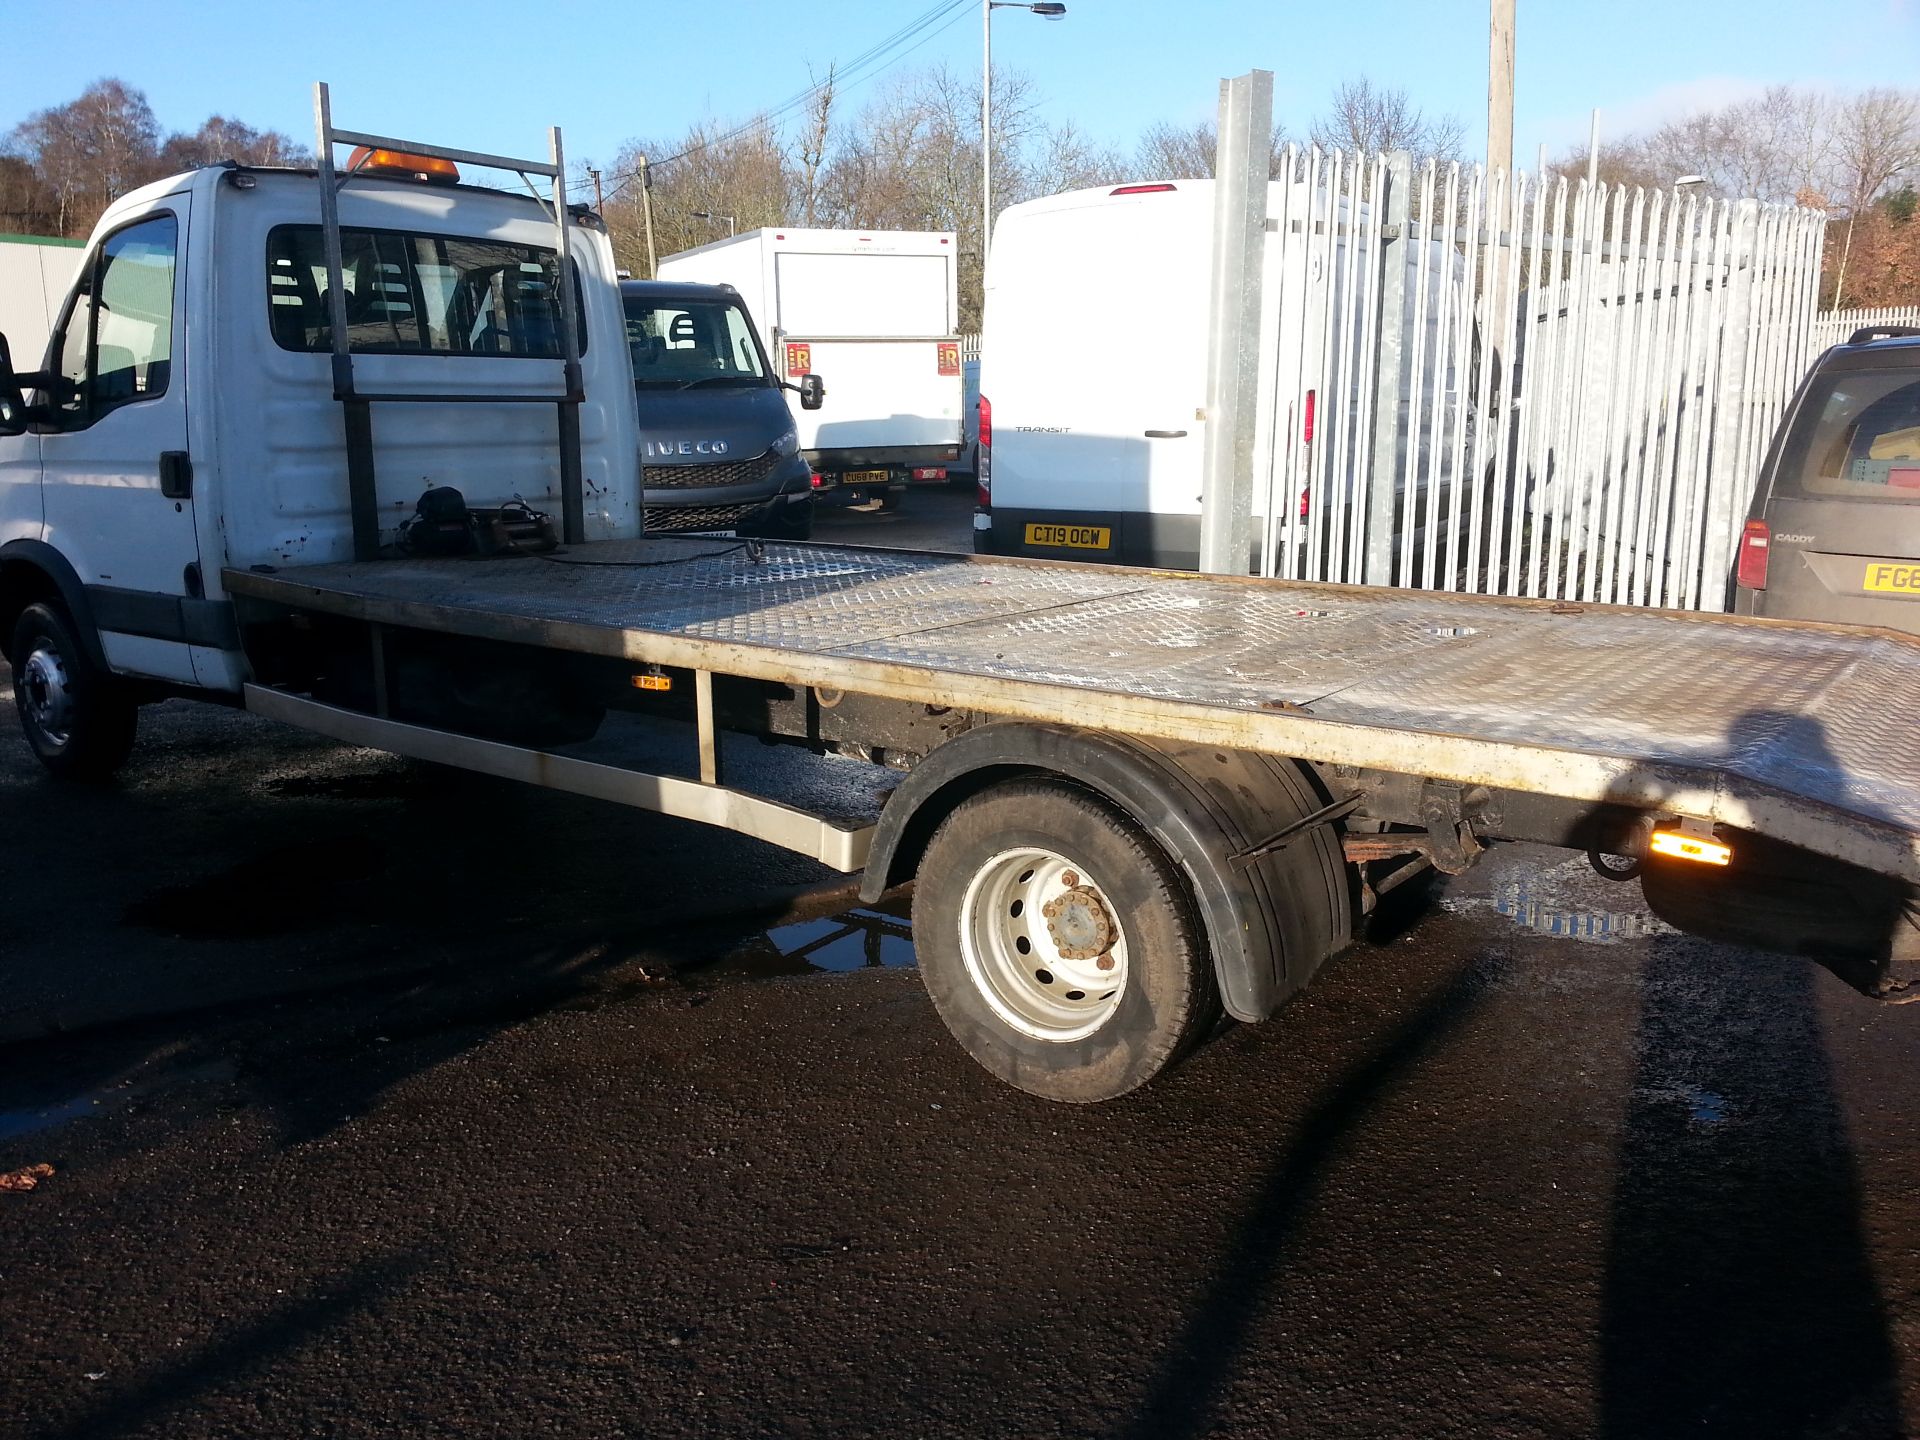 2006/56 IVECO DAILY 65C18 RECOVERY TRUCK, 6.5TON, 3.0 DIESEL ENGINE, 140,459 WARRANTED MILES - Image 4 of 8